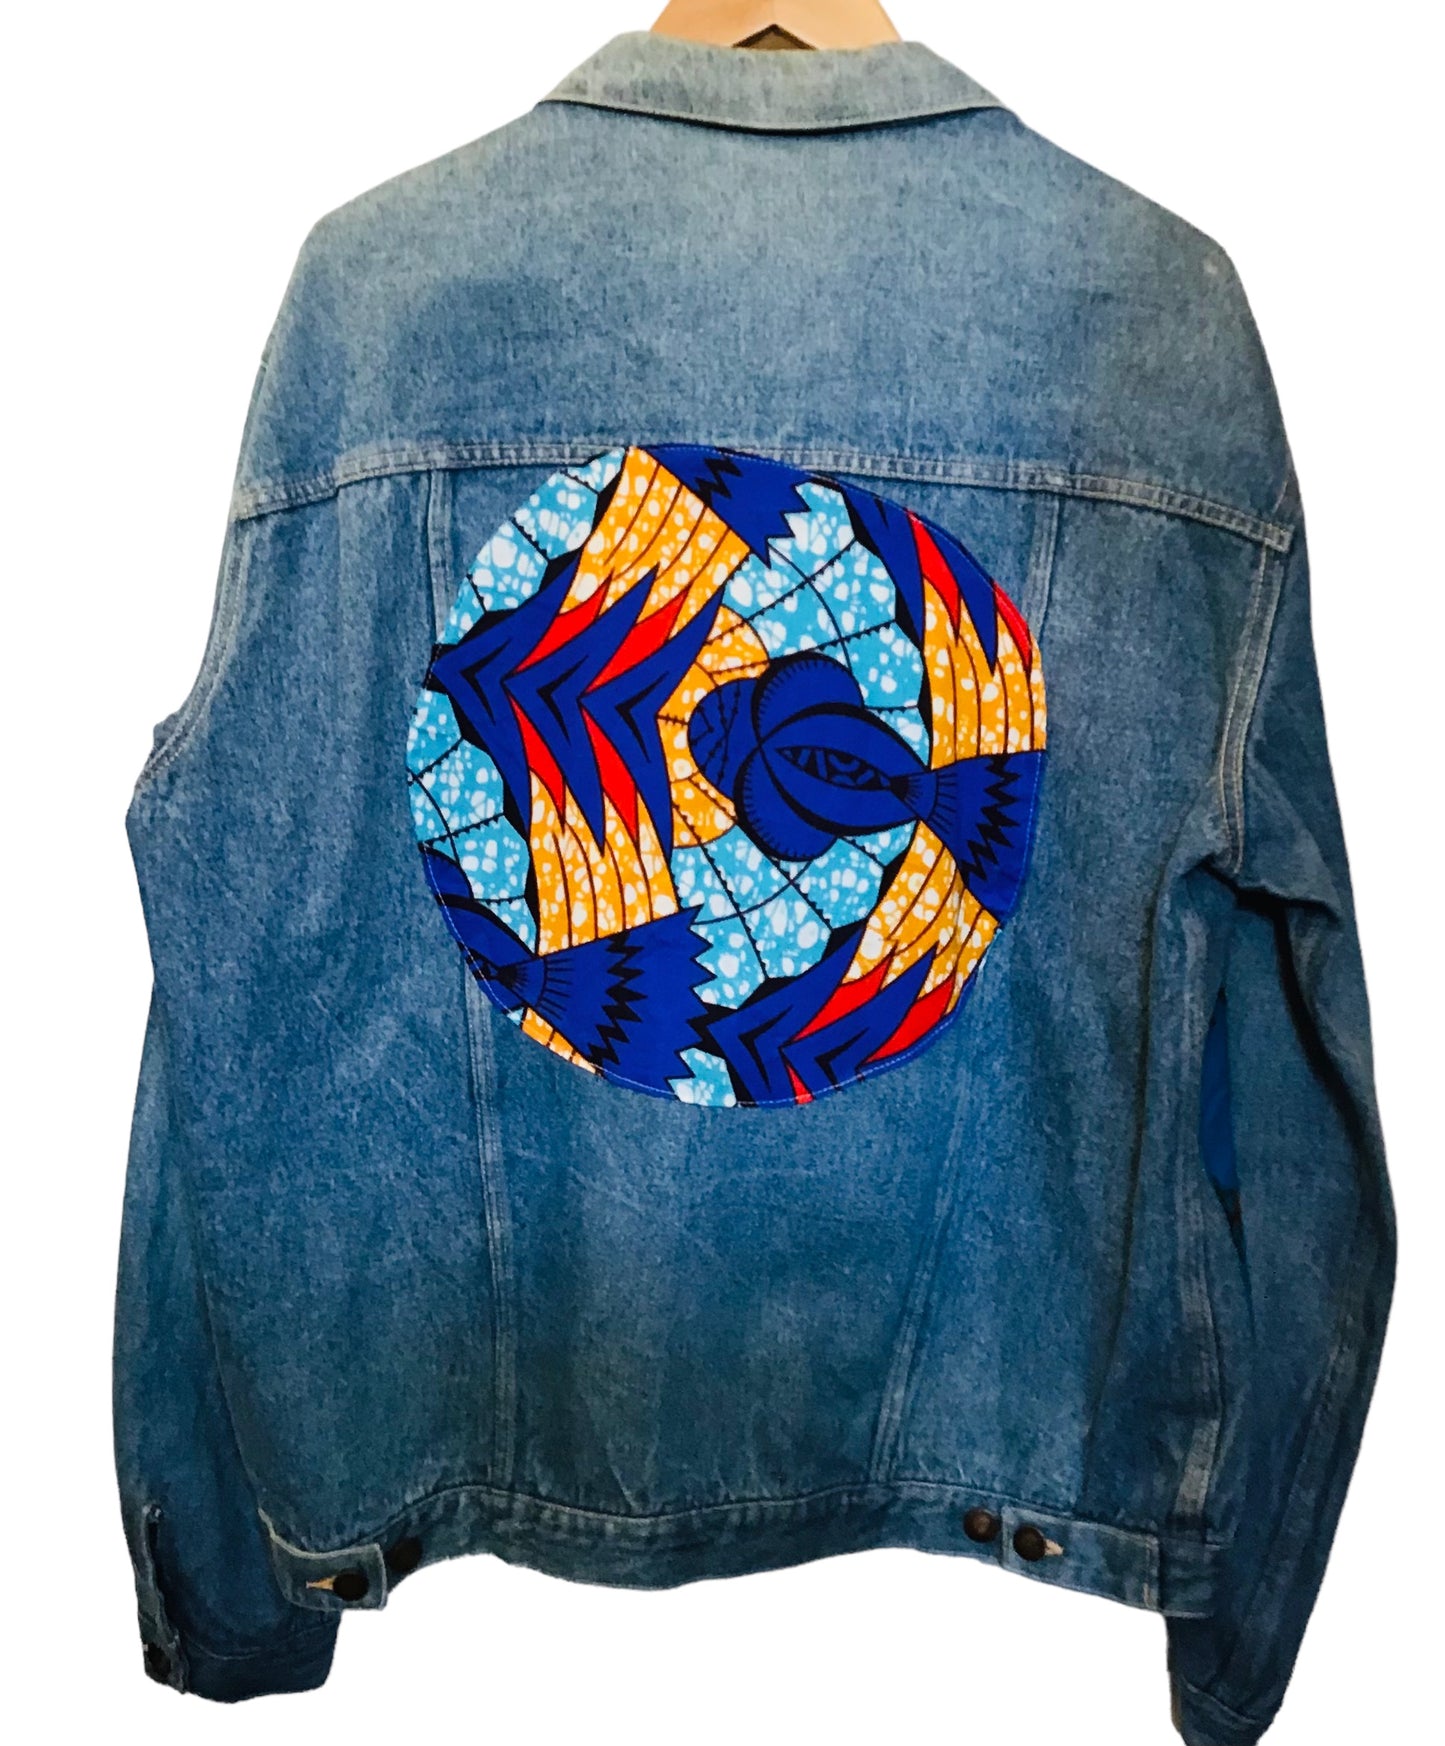 Denim jacket with patch detail front and back (Size M)